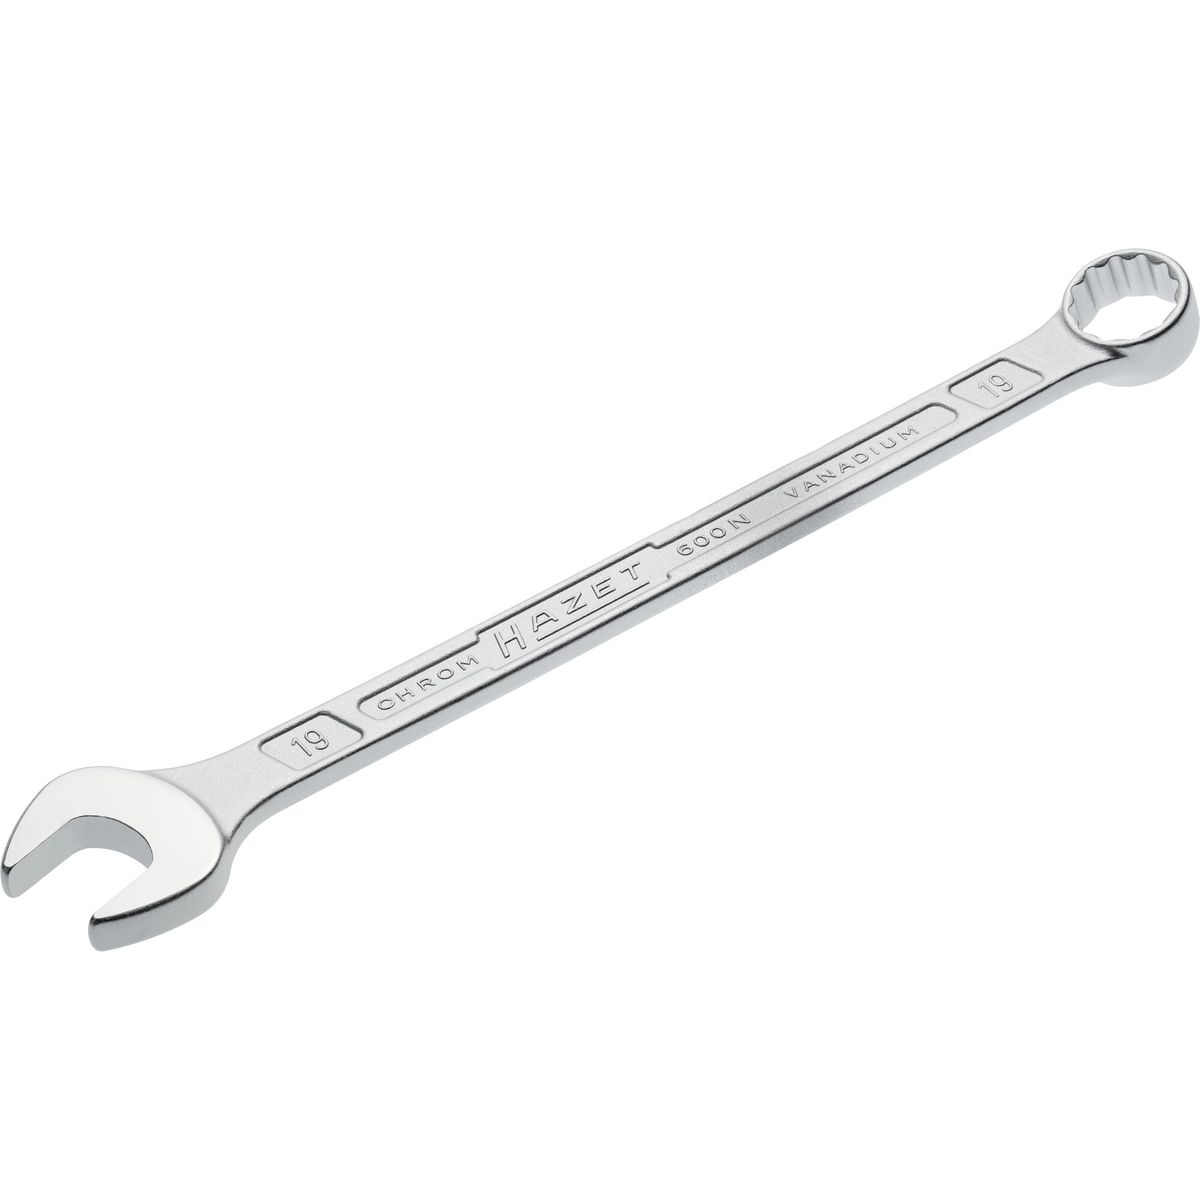 Combination Wrench No.600N-19 Hazet®